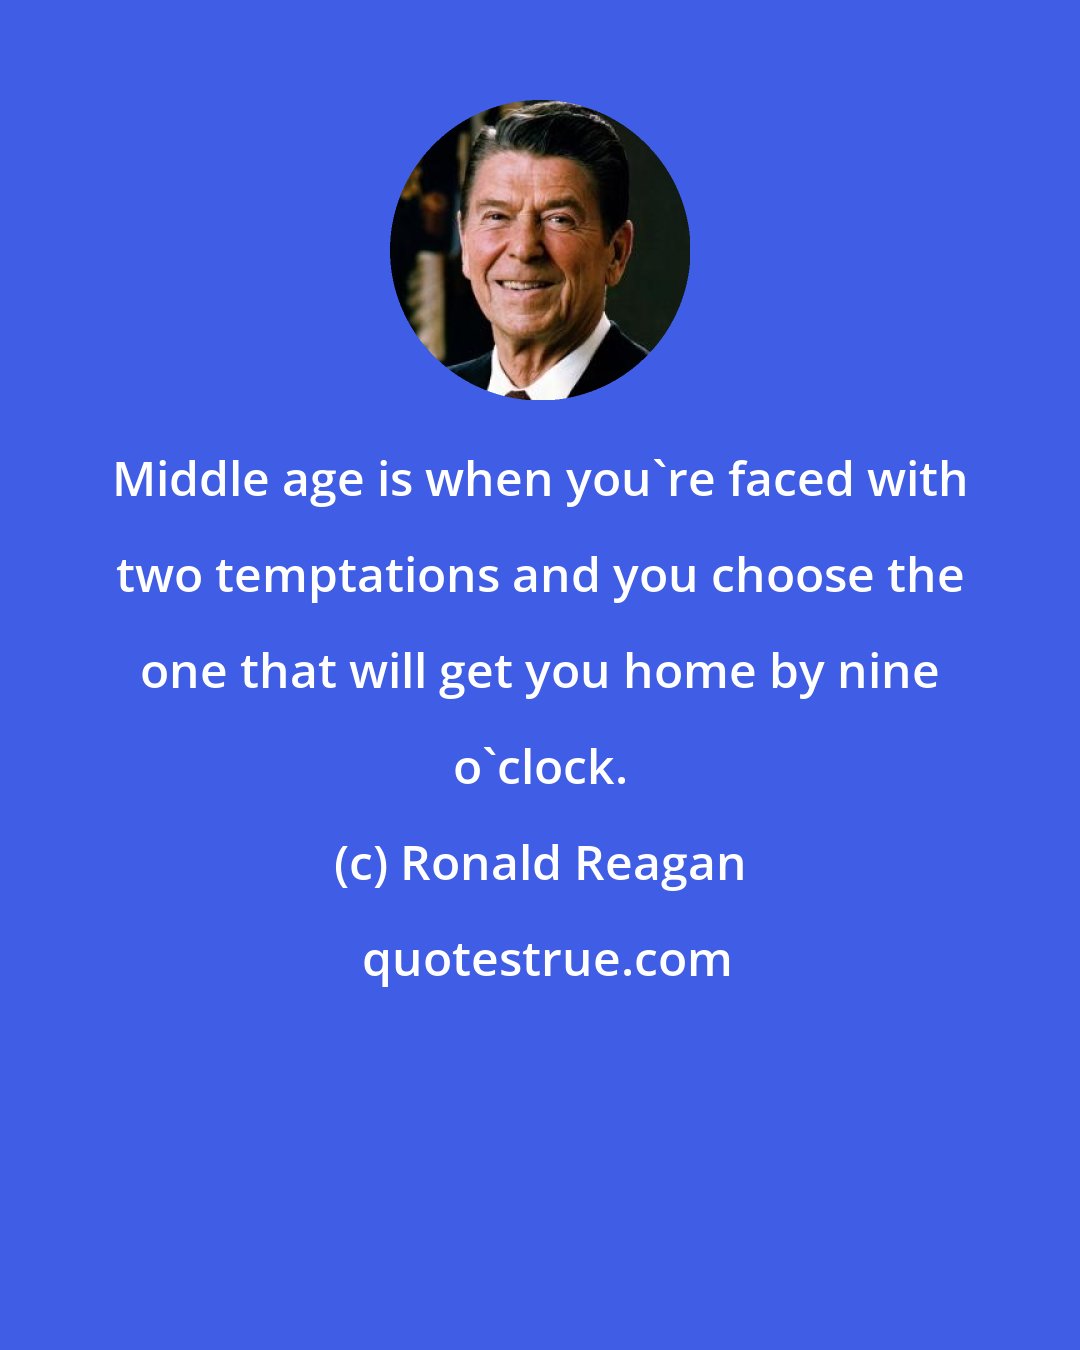 Ronald Reagan: Middle age is when you're faced with two temptations and you choose the one that will get you home by nine o'clock.